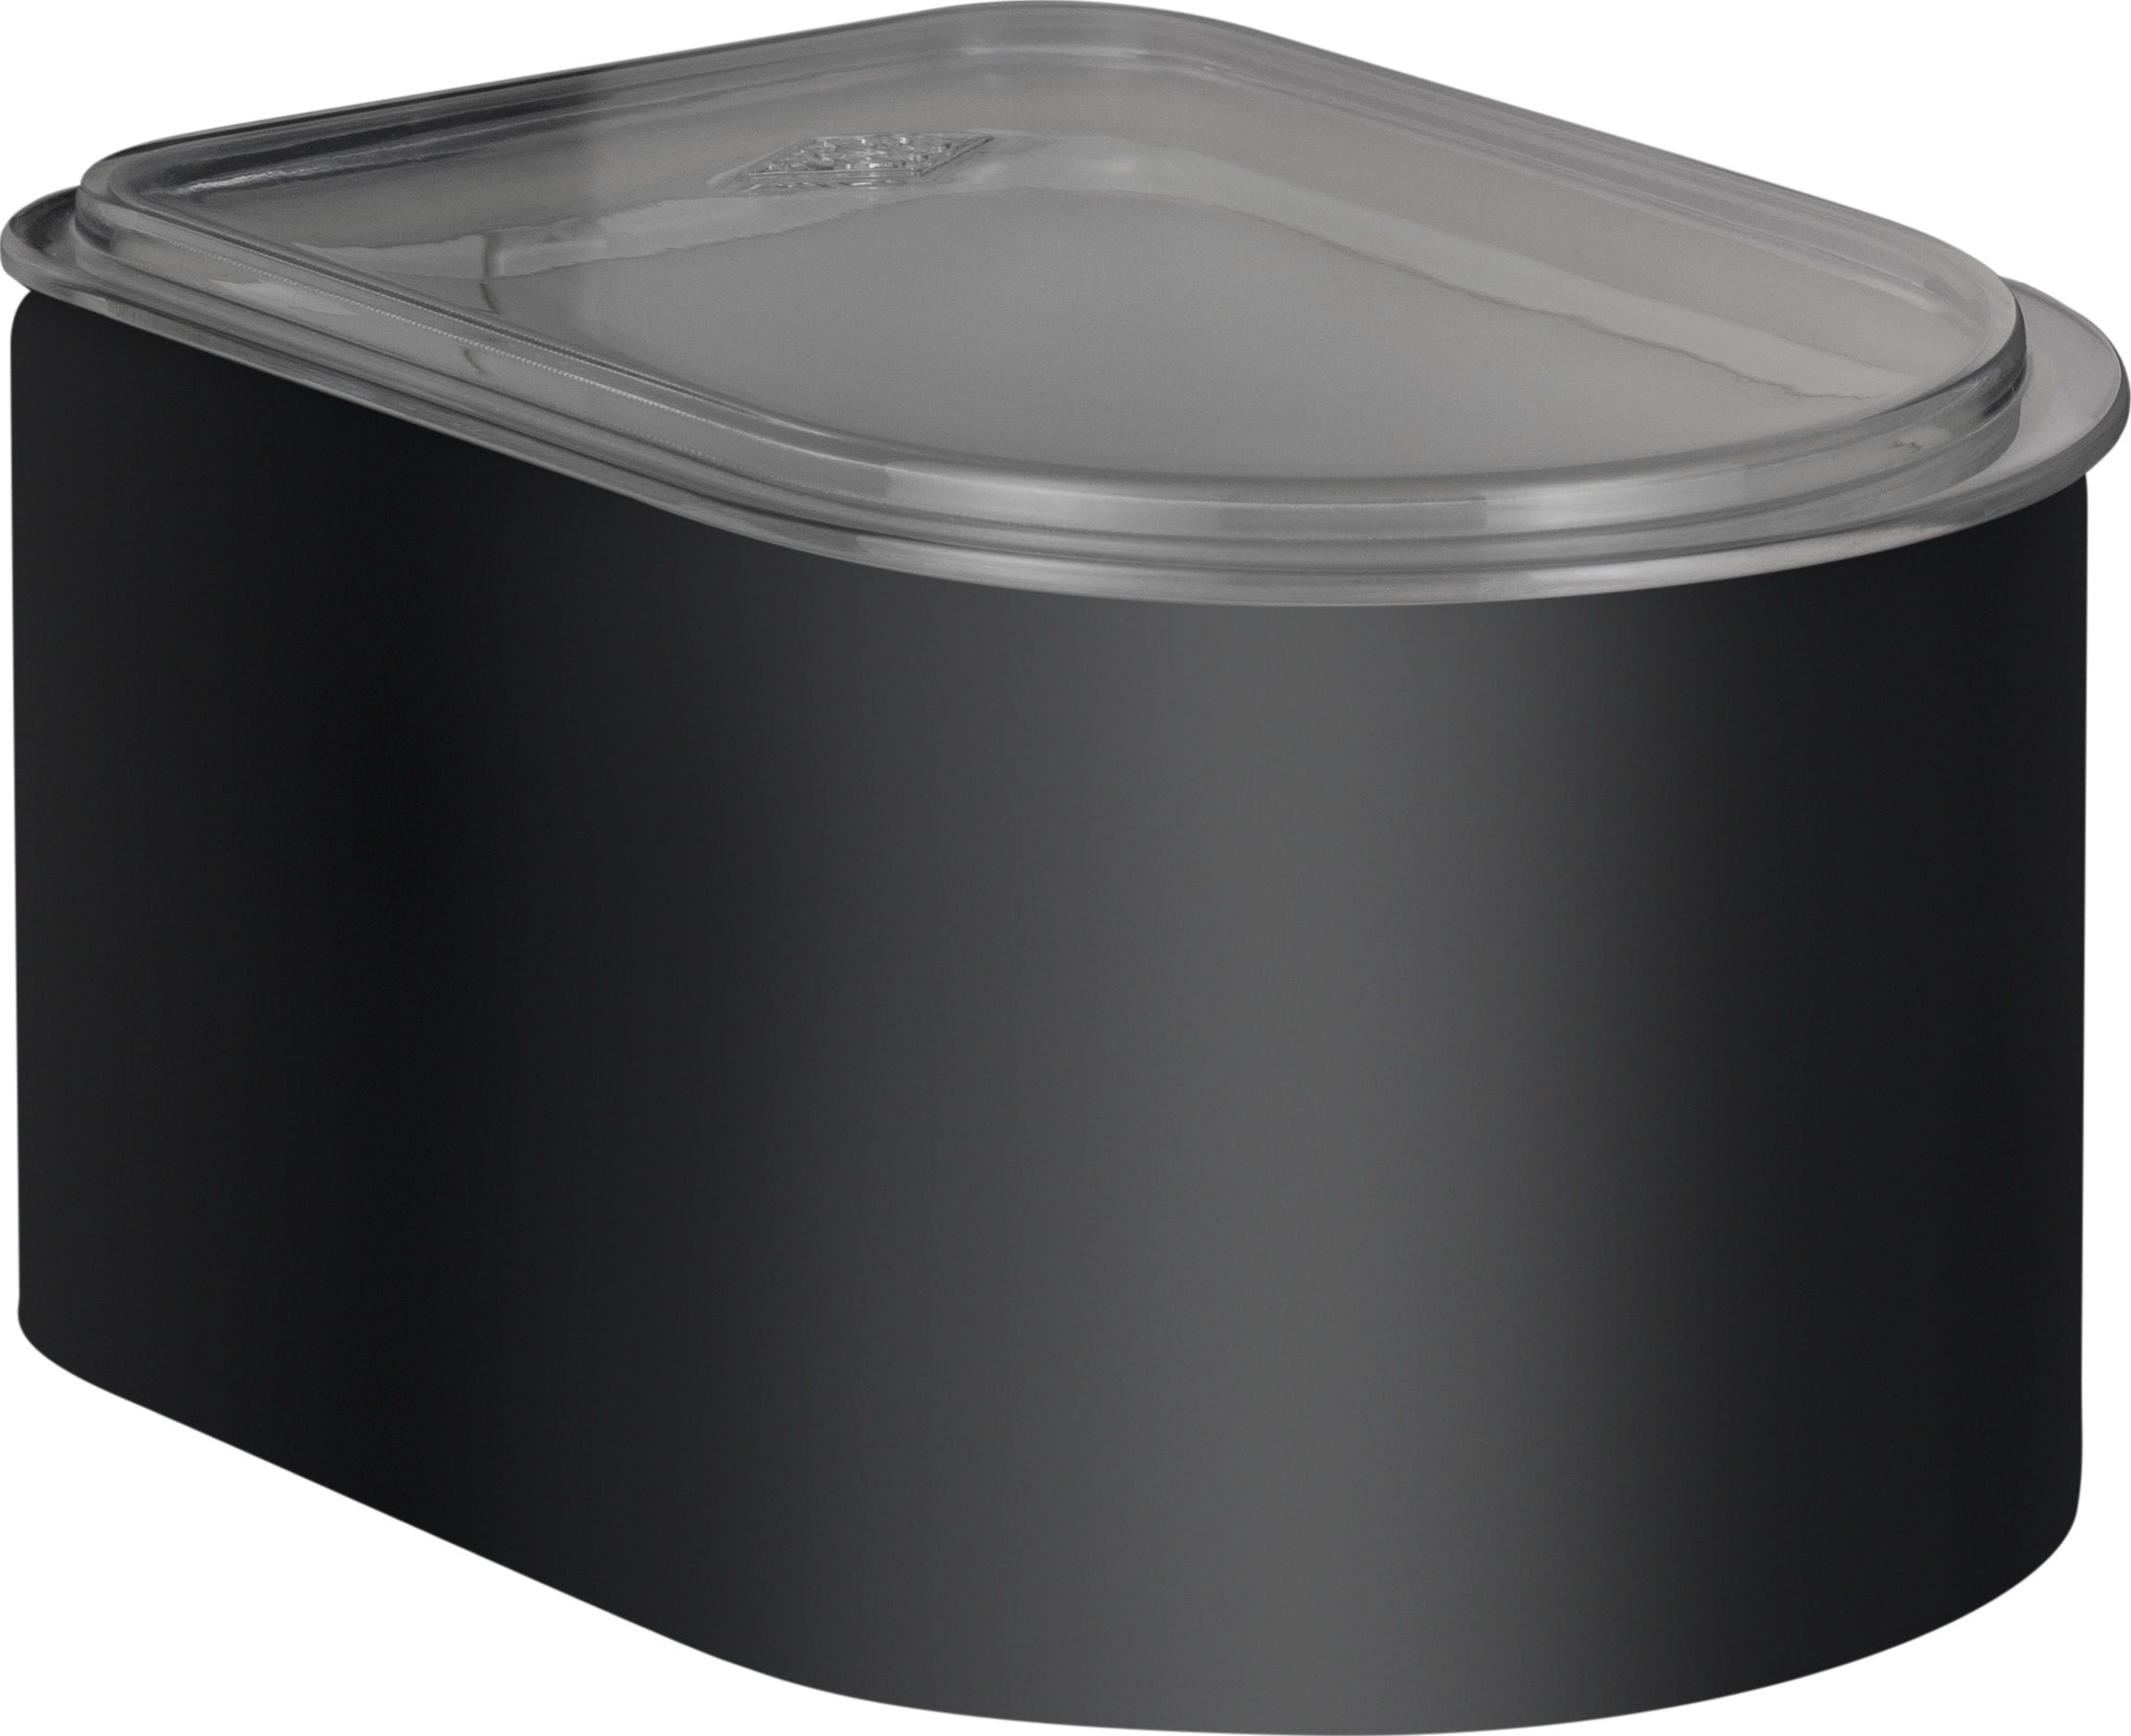 Wesco Canister 1 Litre With Acrylic Lid, Black Matt